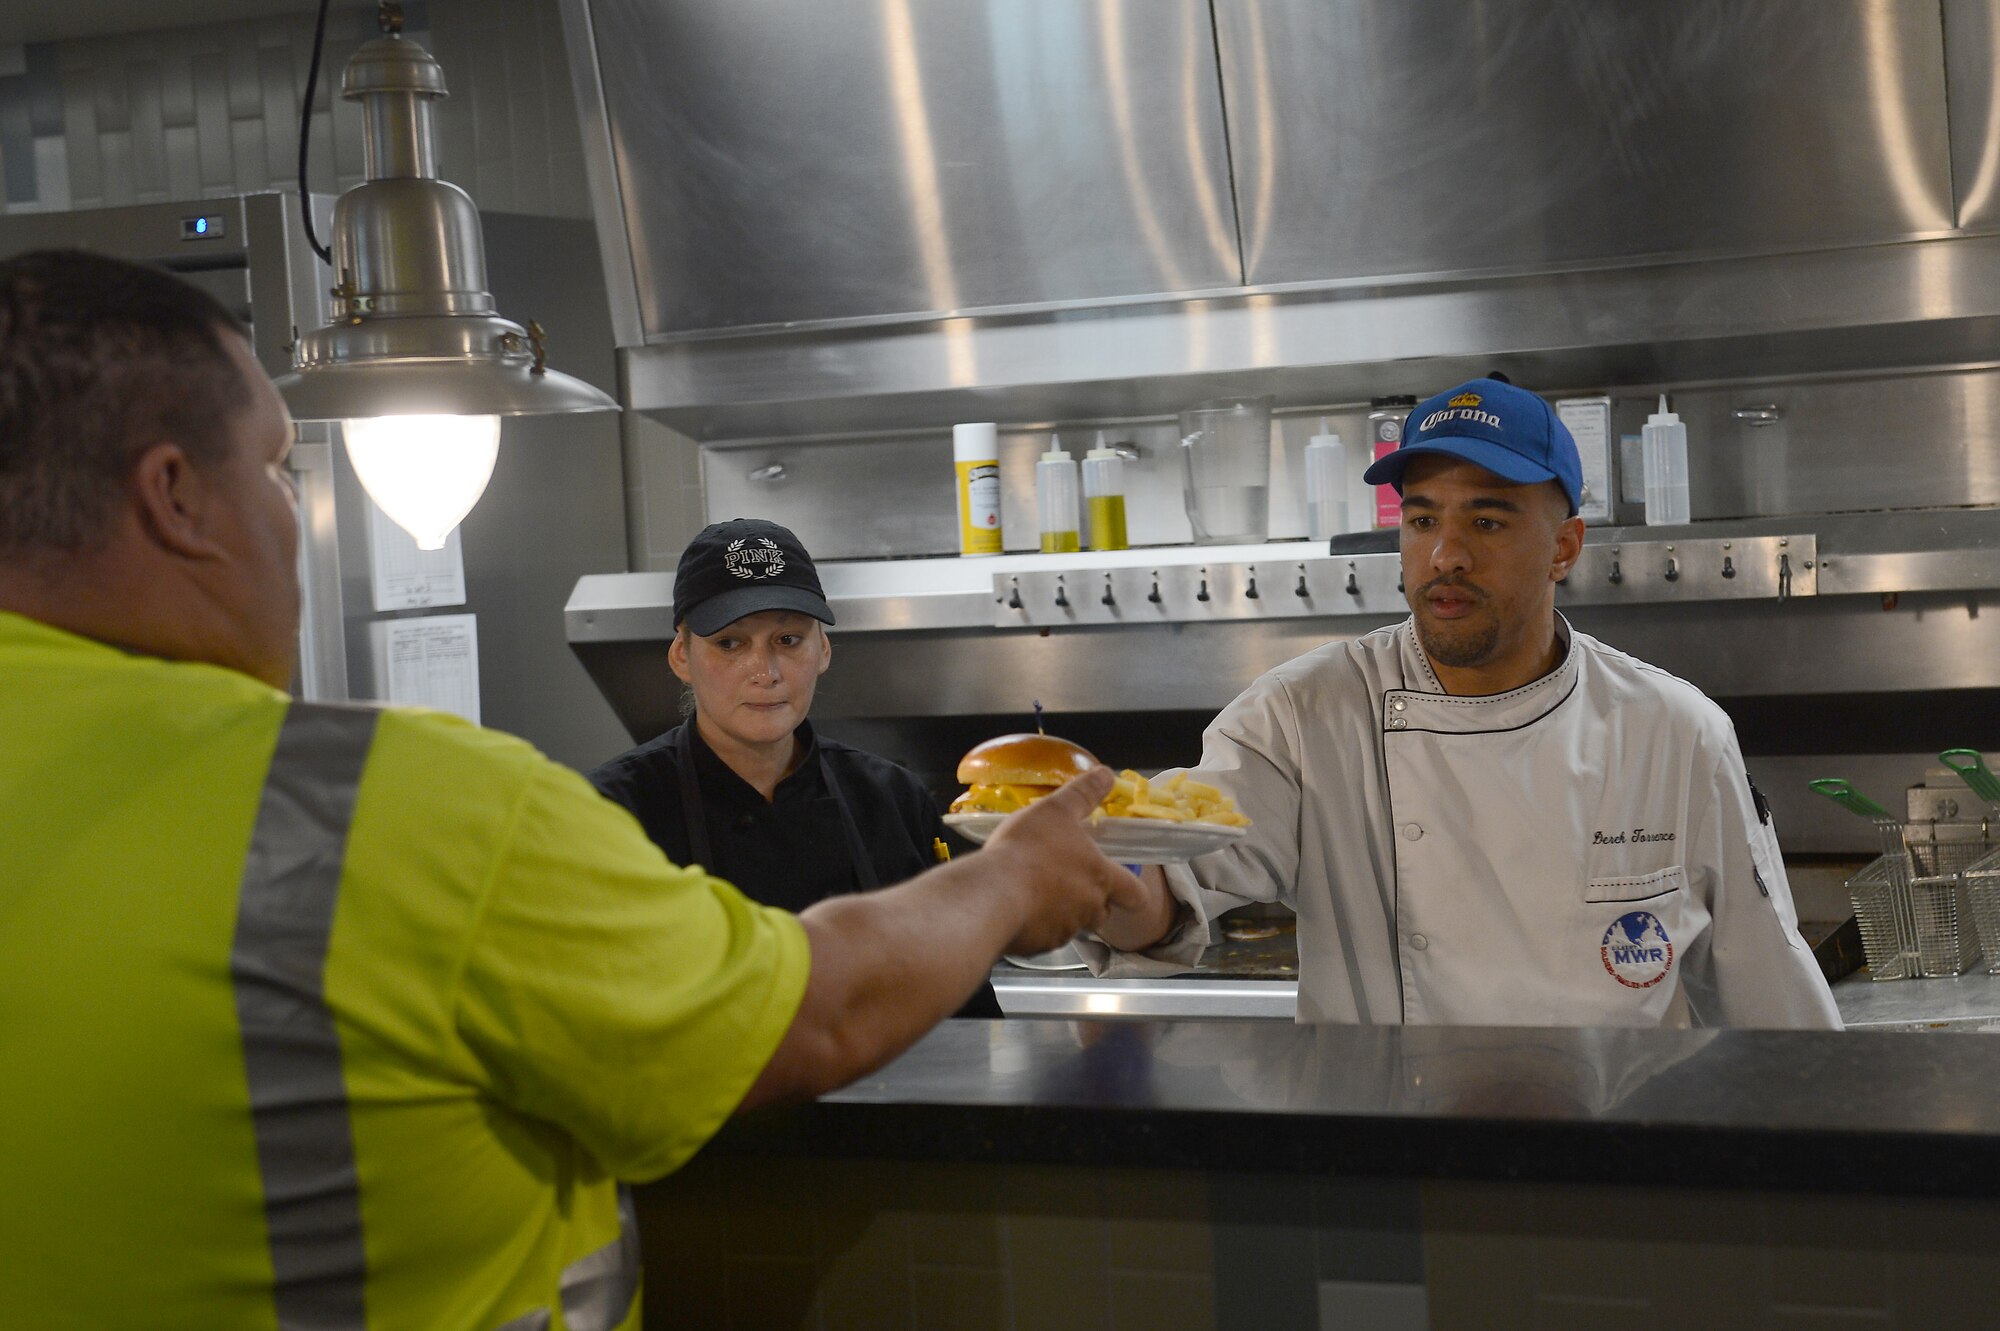 Derek Torrence, McChord Club executive chef, gives a customer his lunch at McChord Grill, May 10, 2017 at Joint Base Lewis-McChord, Wash. Here at McChord, the club provides services for Airman Leadership School graduations, weddings, retirements, promotions, farewells and during lunch at McChord Grill. (U.S. Air Force photo/Senior Airman Divine Cox)